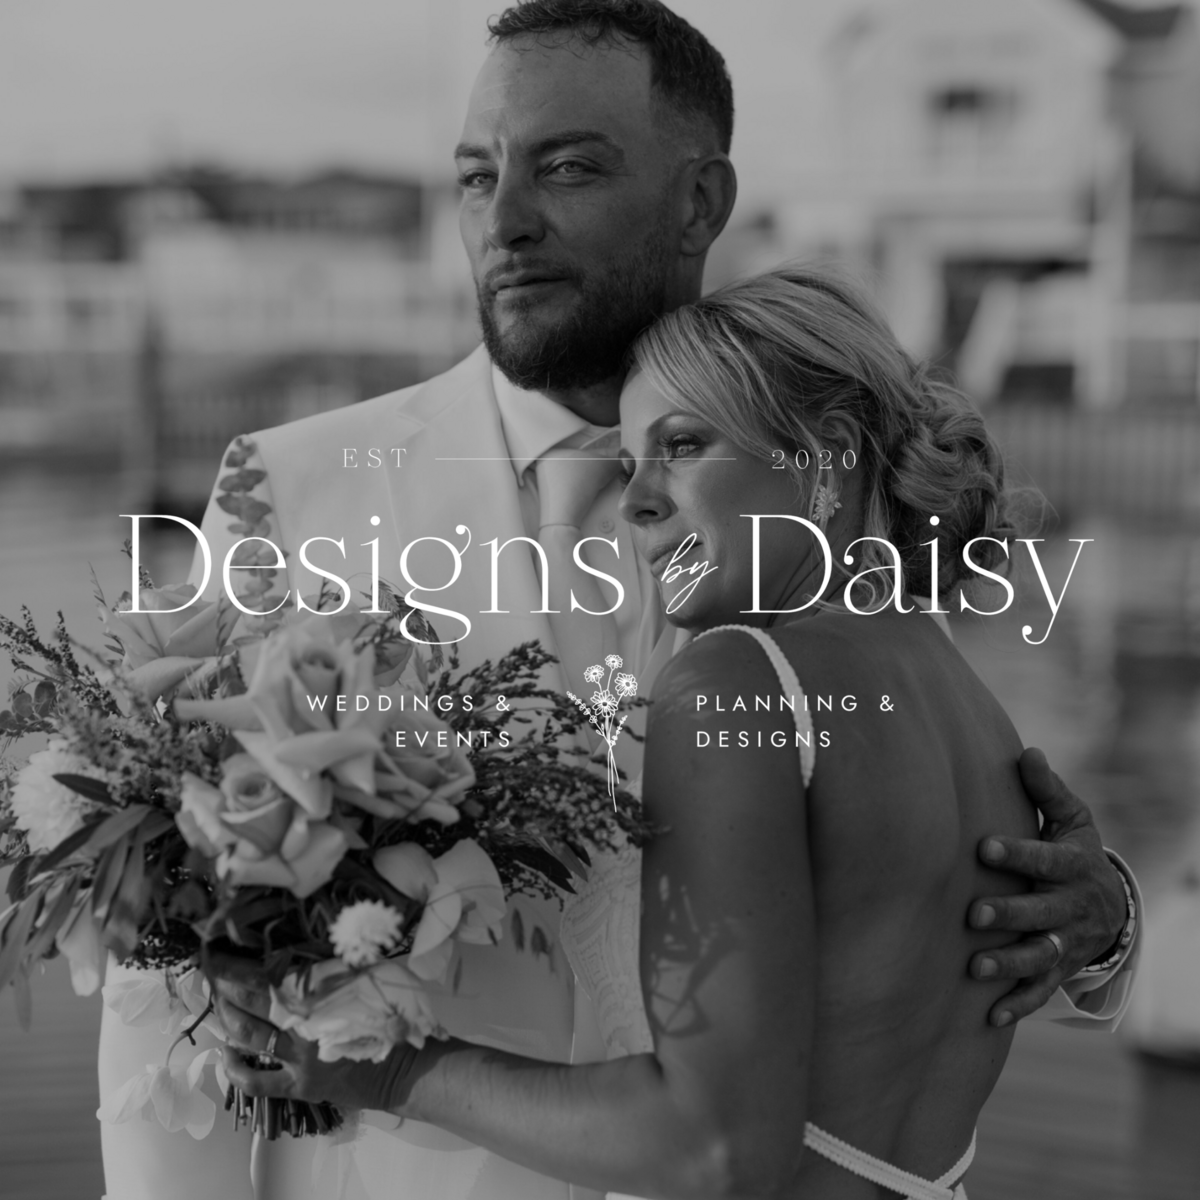 Designs By Daisy | Planning + Design | Weddings & Events